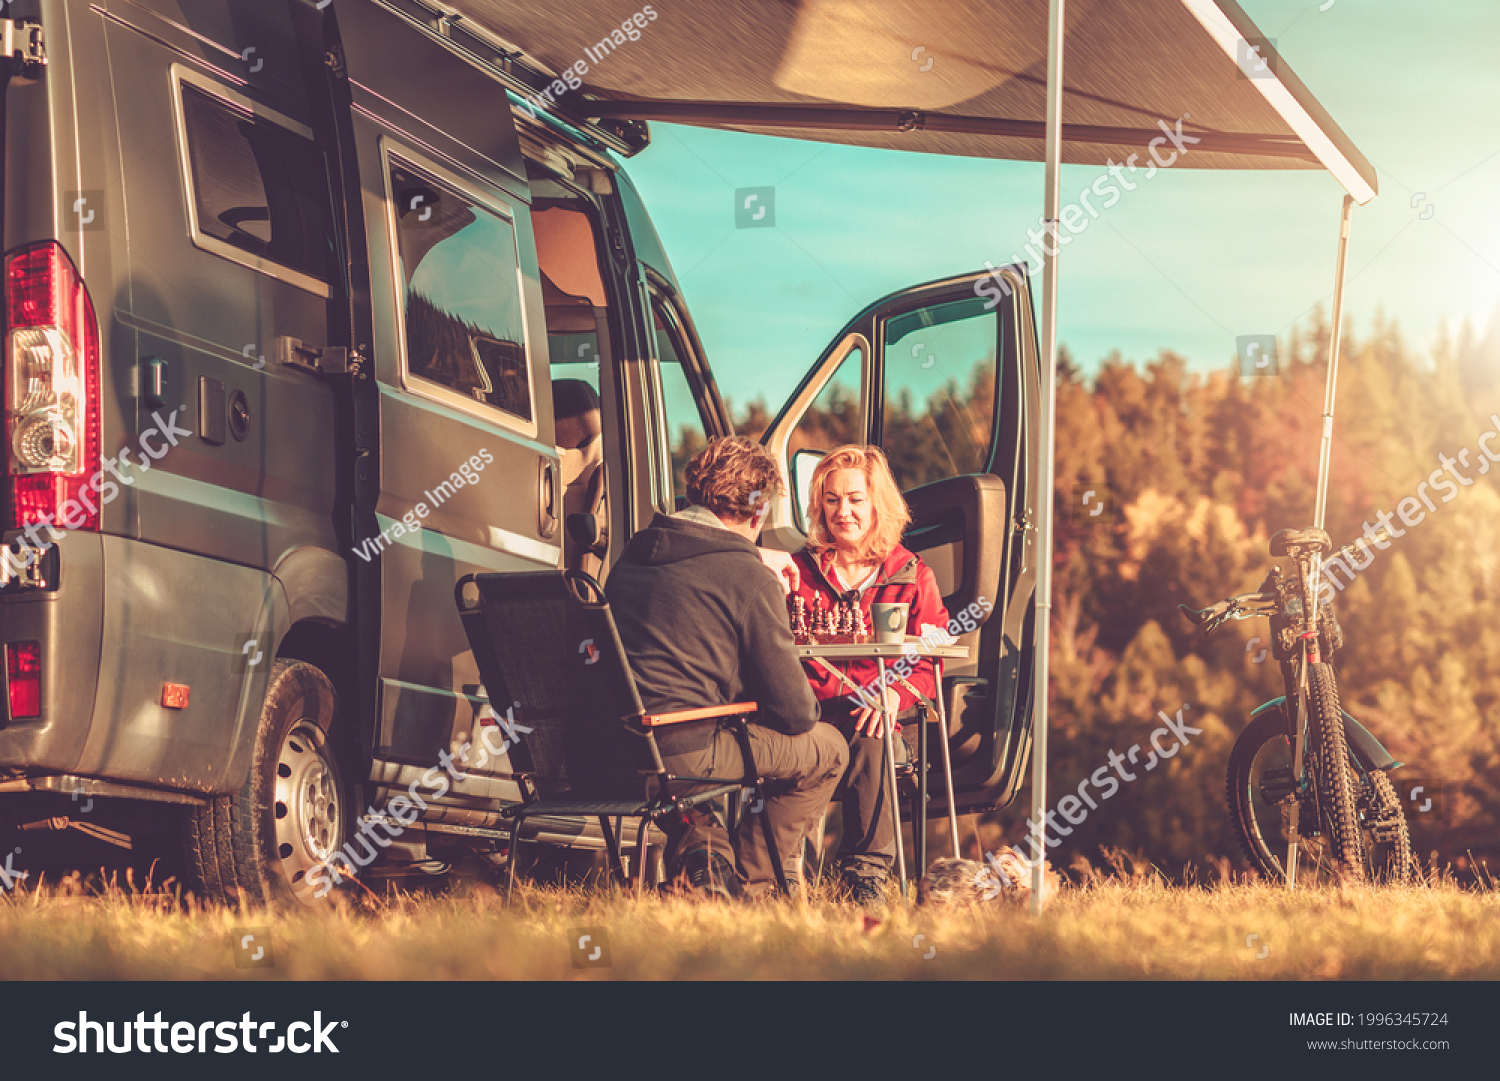 Caucasian Couple Playing Chess Next to Their Camper Van RV During Vacation Camping Time. Recreational Vehicles and Road Trip Theme. #1996345724